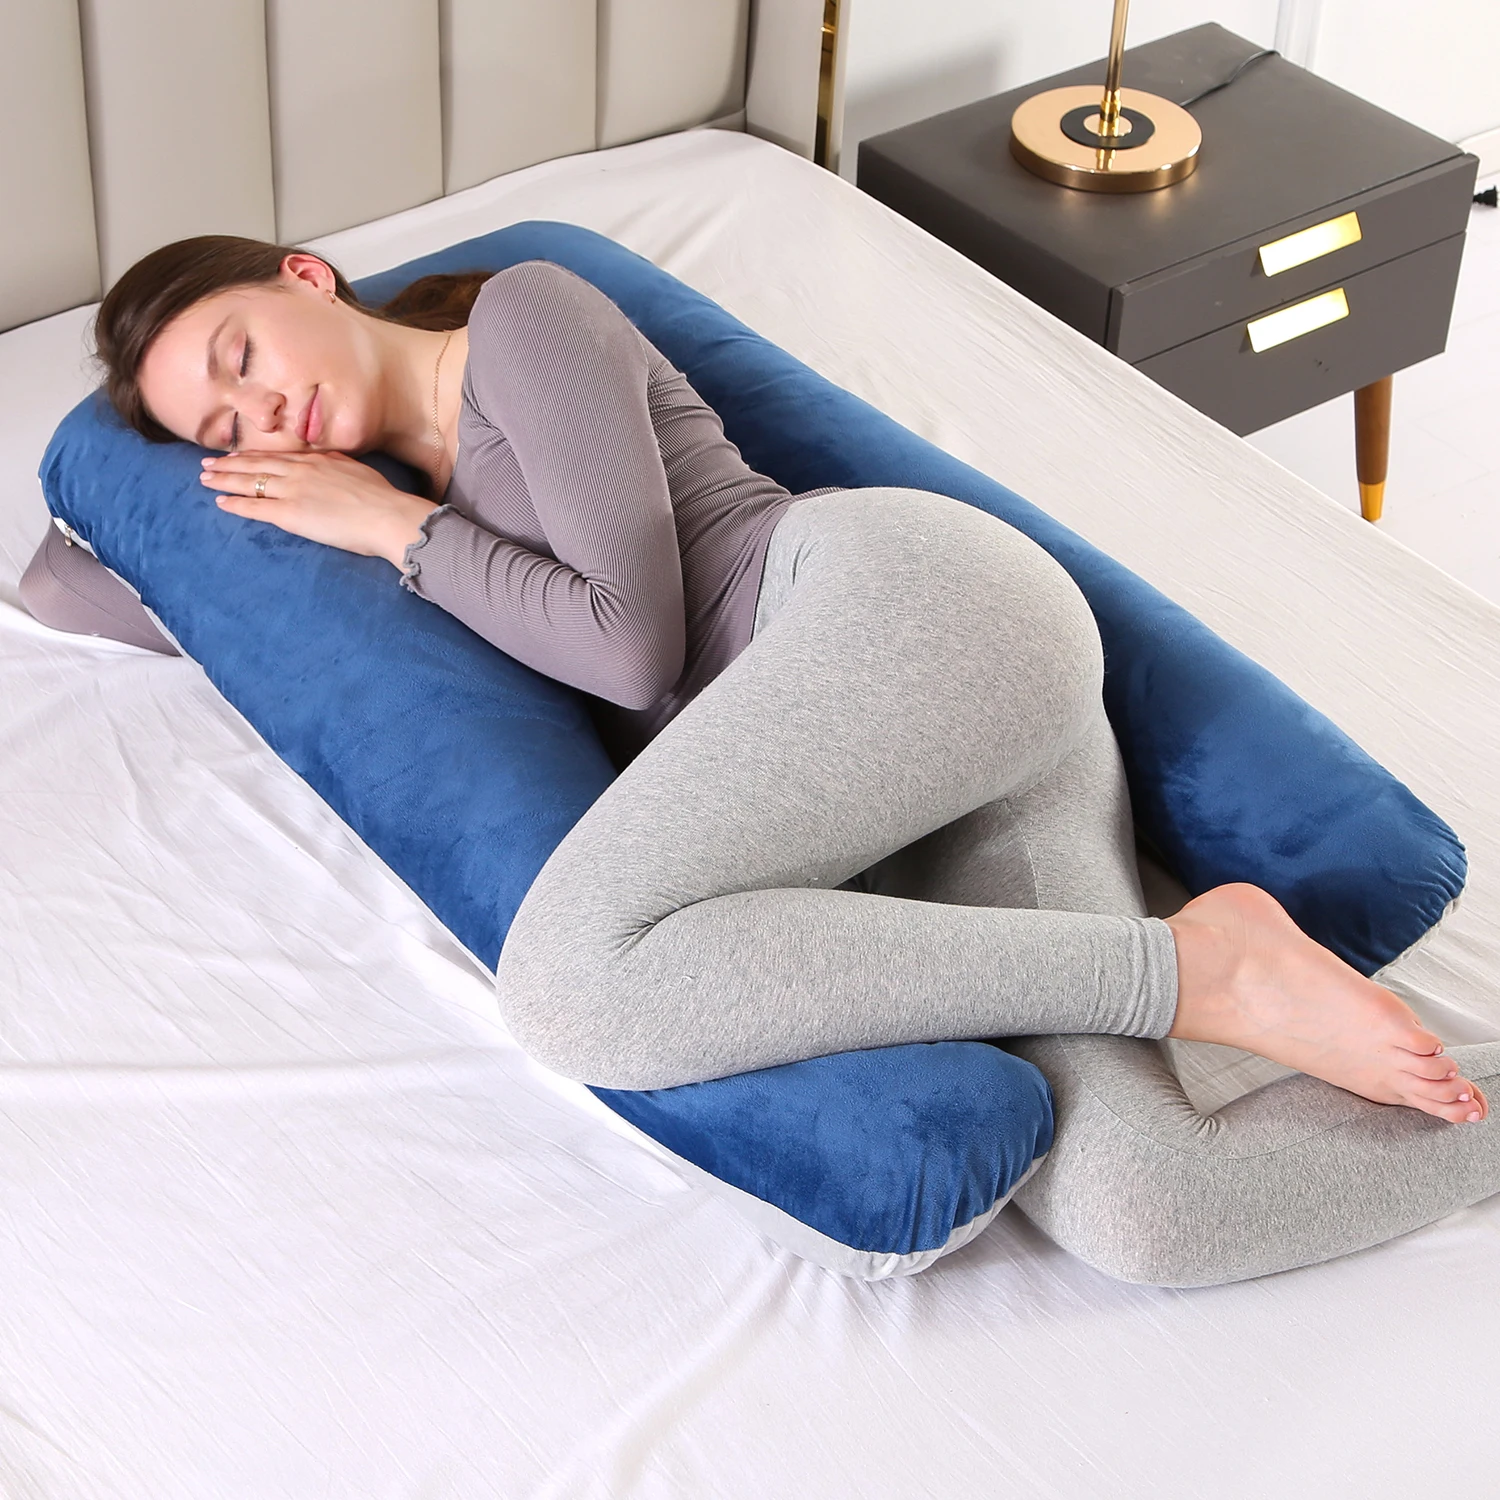 Details about    U Shape Full Body Pregnancy Pillow Maternity Mother Sleeping Cushions 